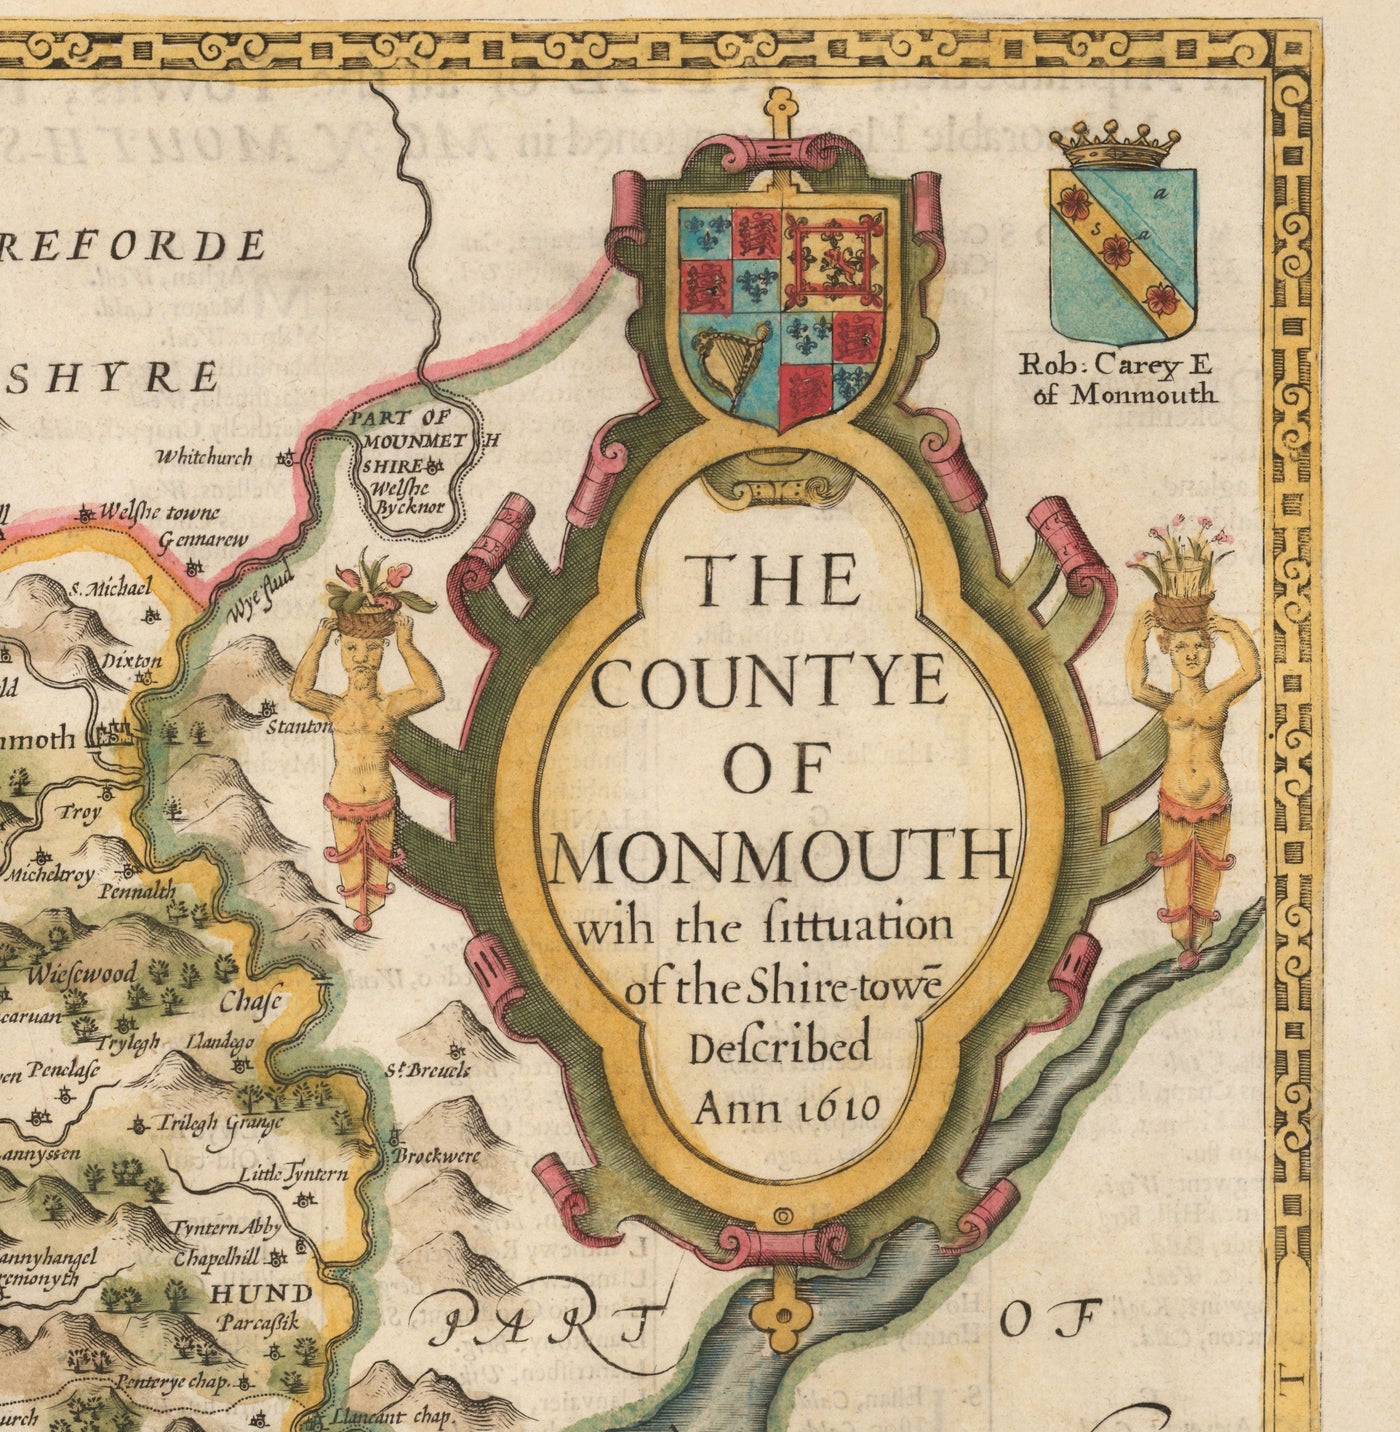 Old Map of Monmouthshire, Wales, 1611 by John Speed - Abergavenny, Caldicot, Chepstow, Monmouth, Magor